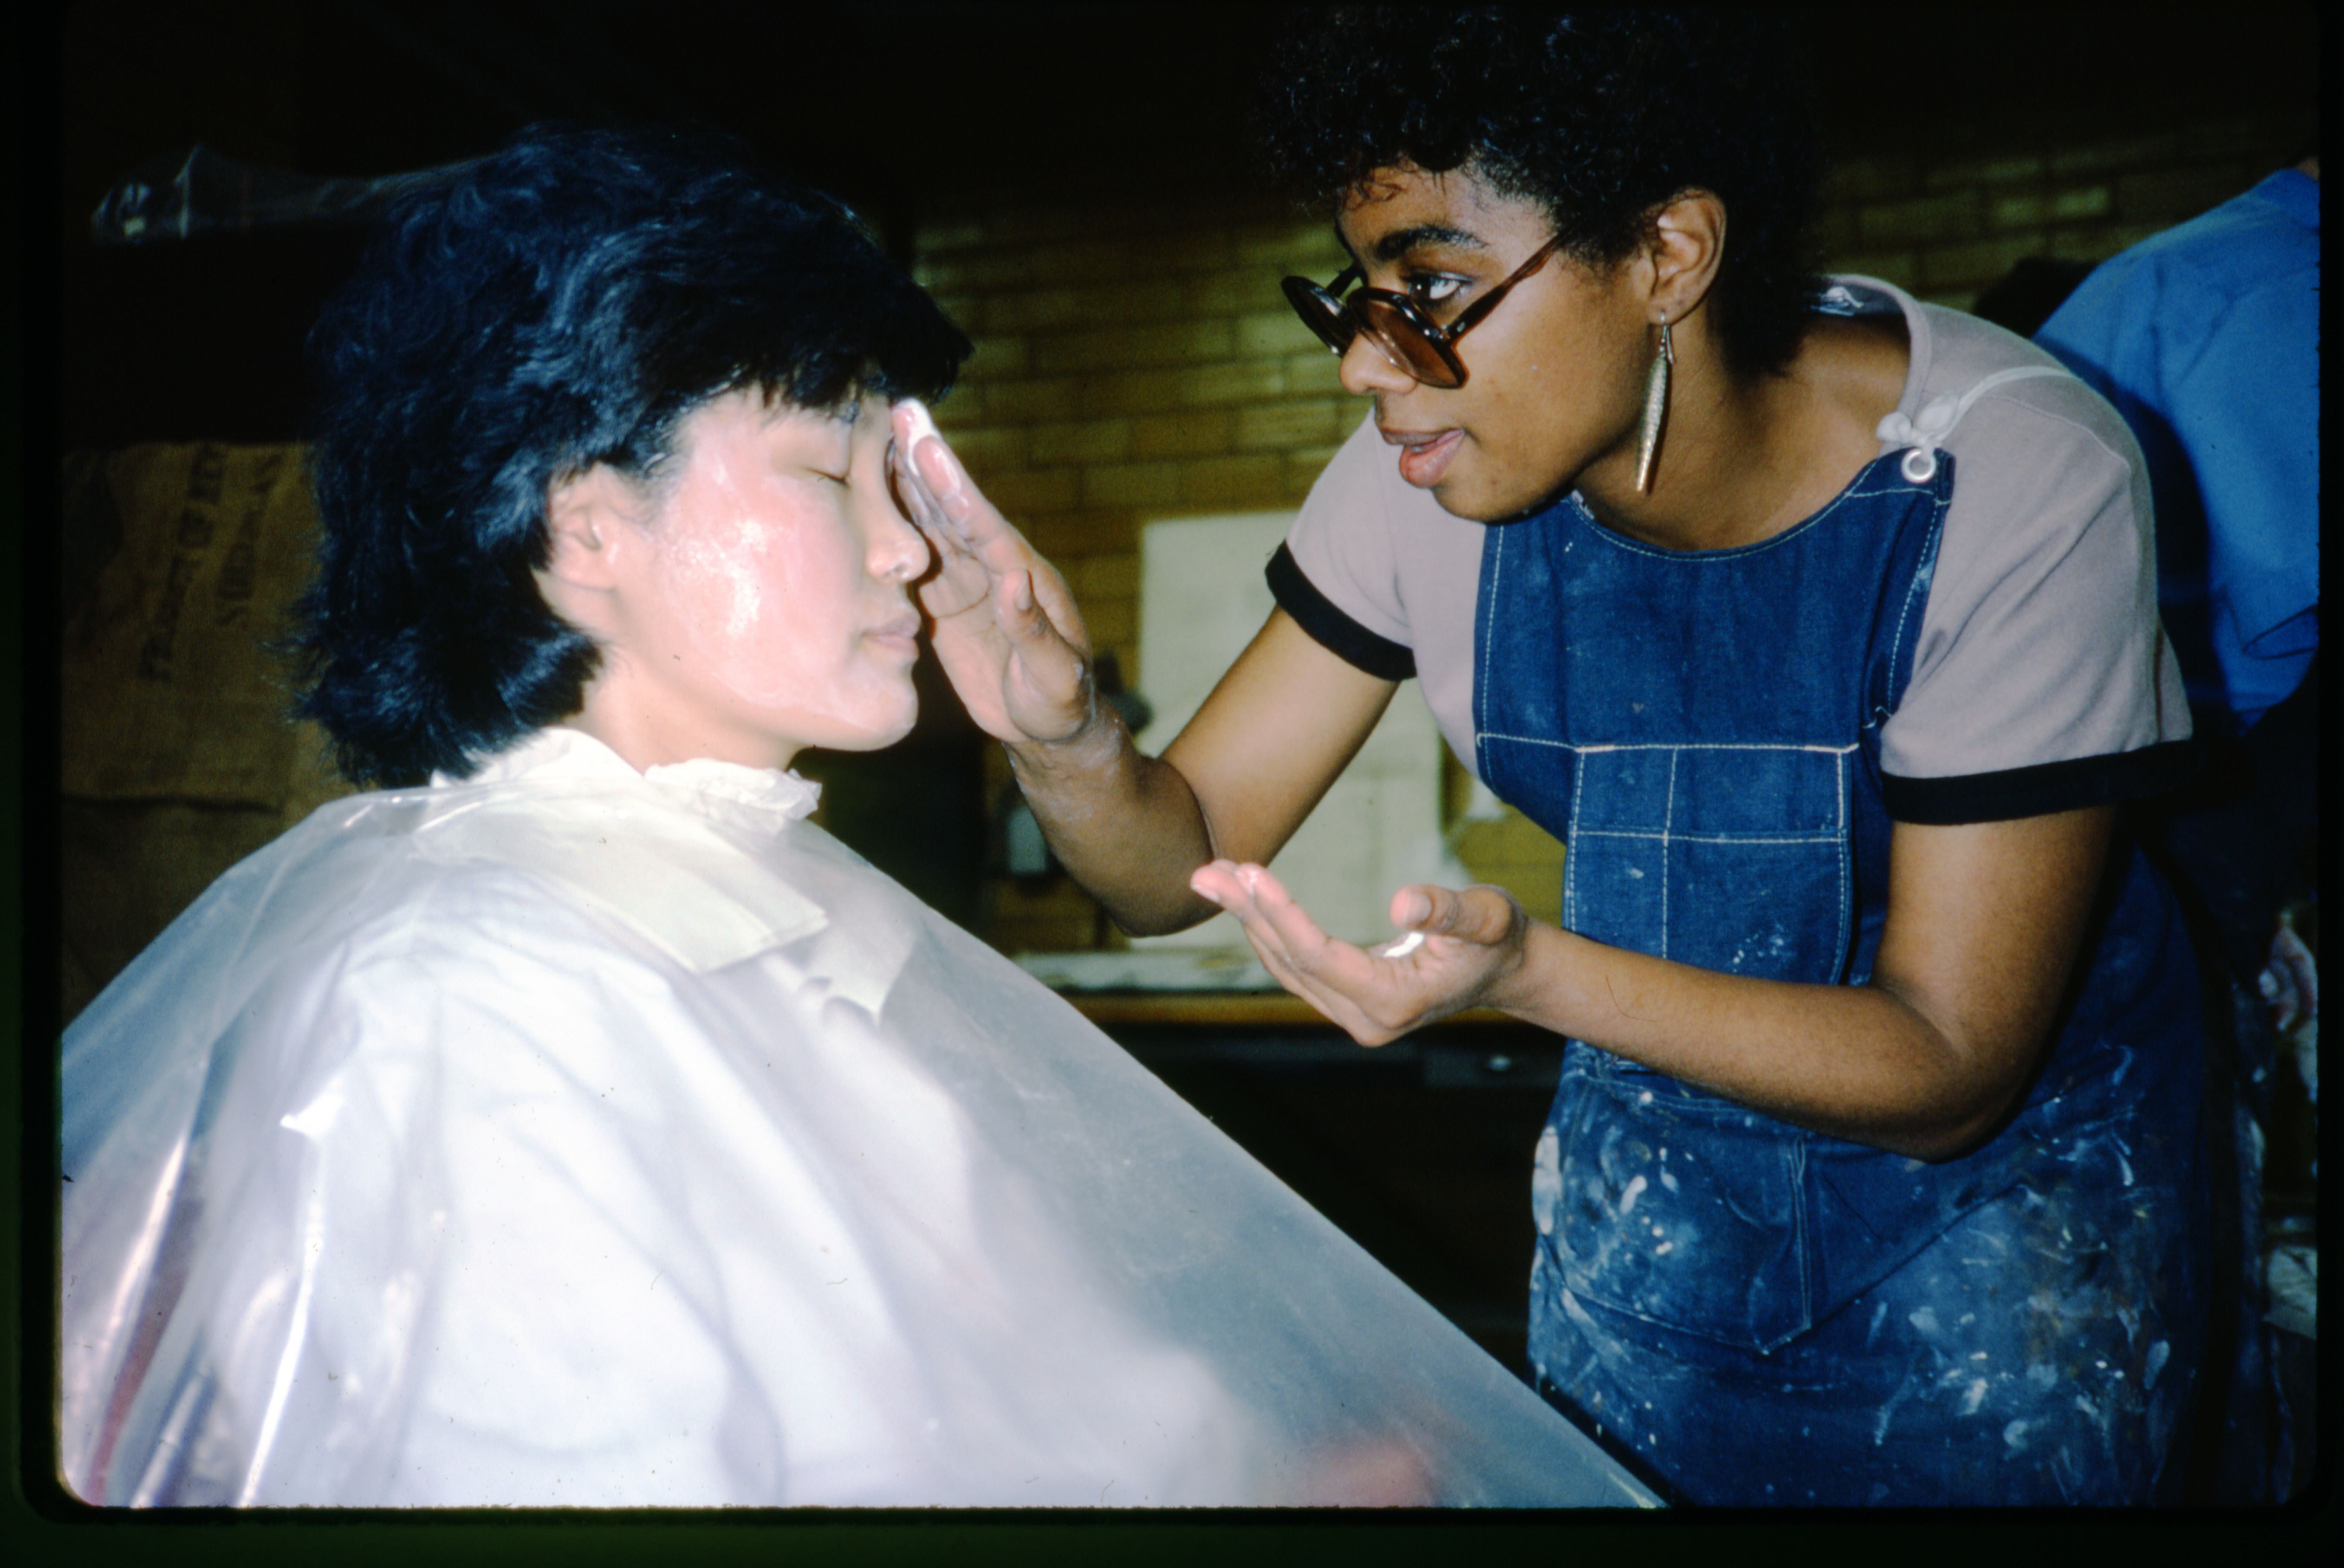 Patricia Harrison, senior preparator at AMNH, applies moisturizer to Chong-Hwa Lim’s face in preparation for making the mold.